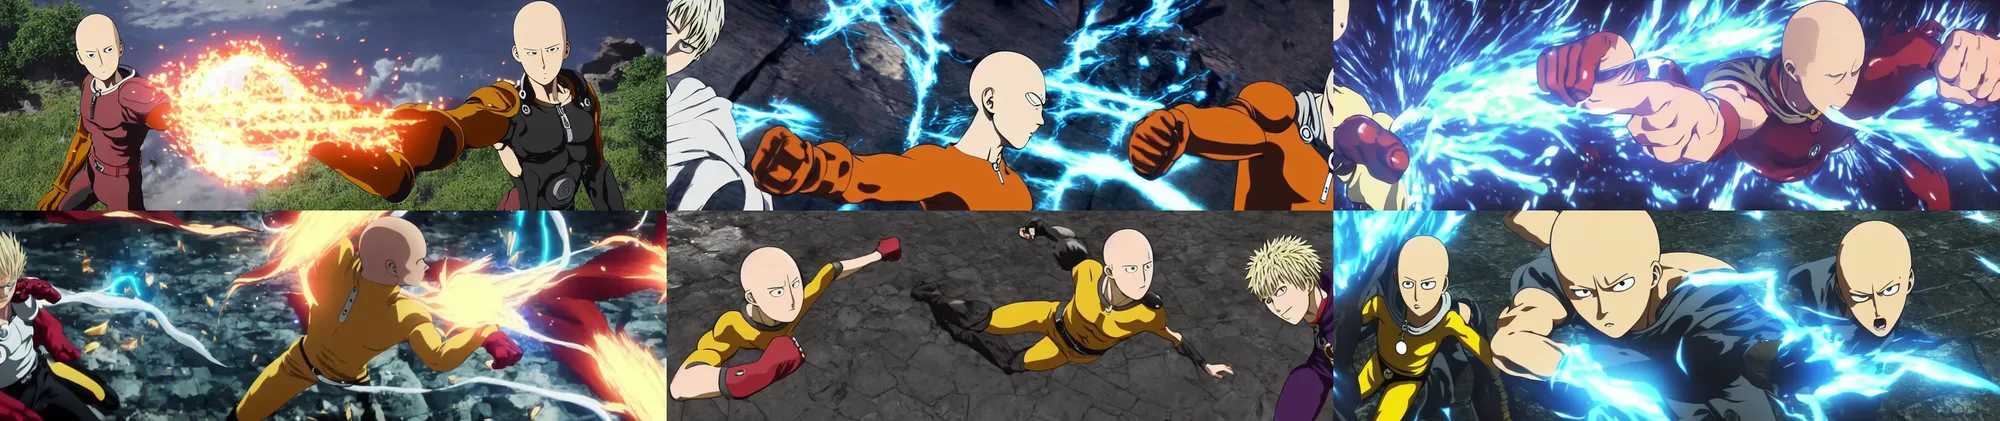 Prompt: screenshot of epic fight scene between saitama (one punch man) fighting genos (one punch man), PS5 unreal engine 5 realistic graphics 8k